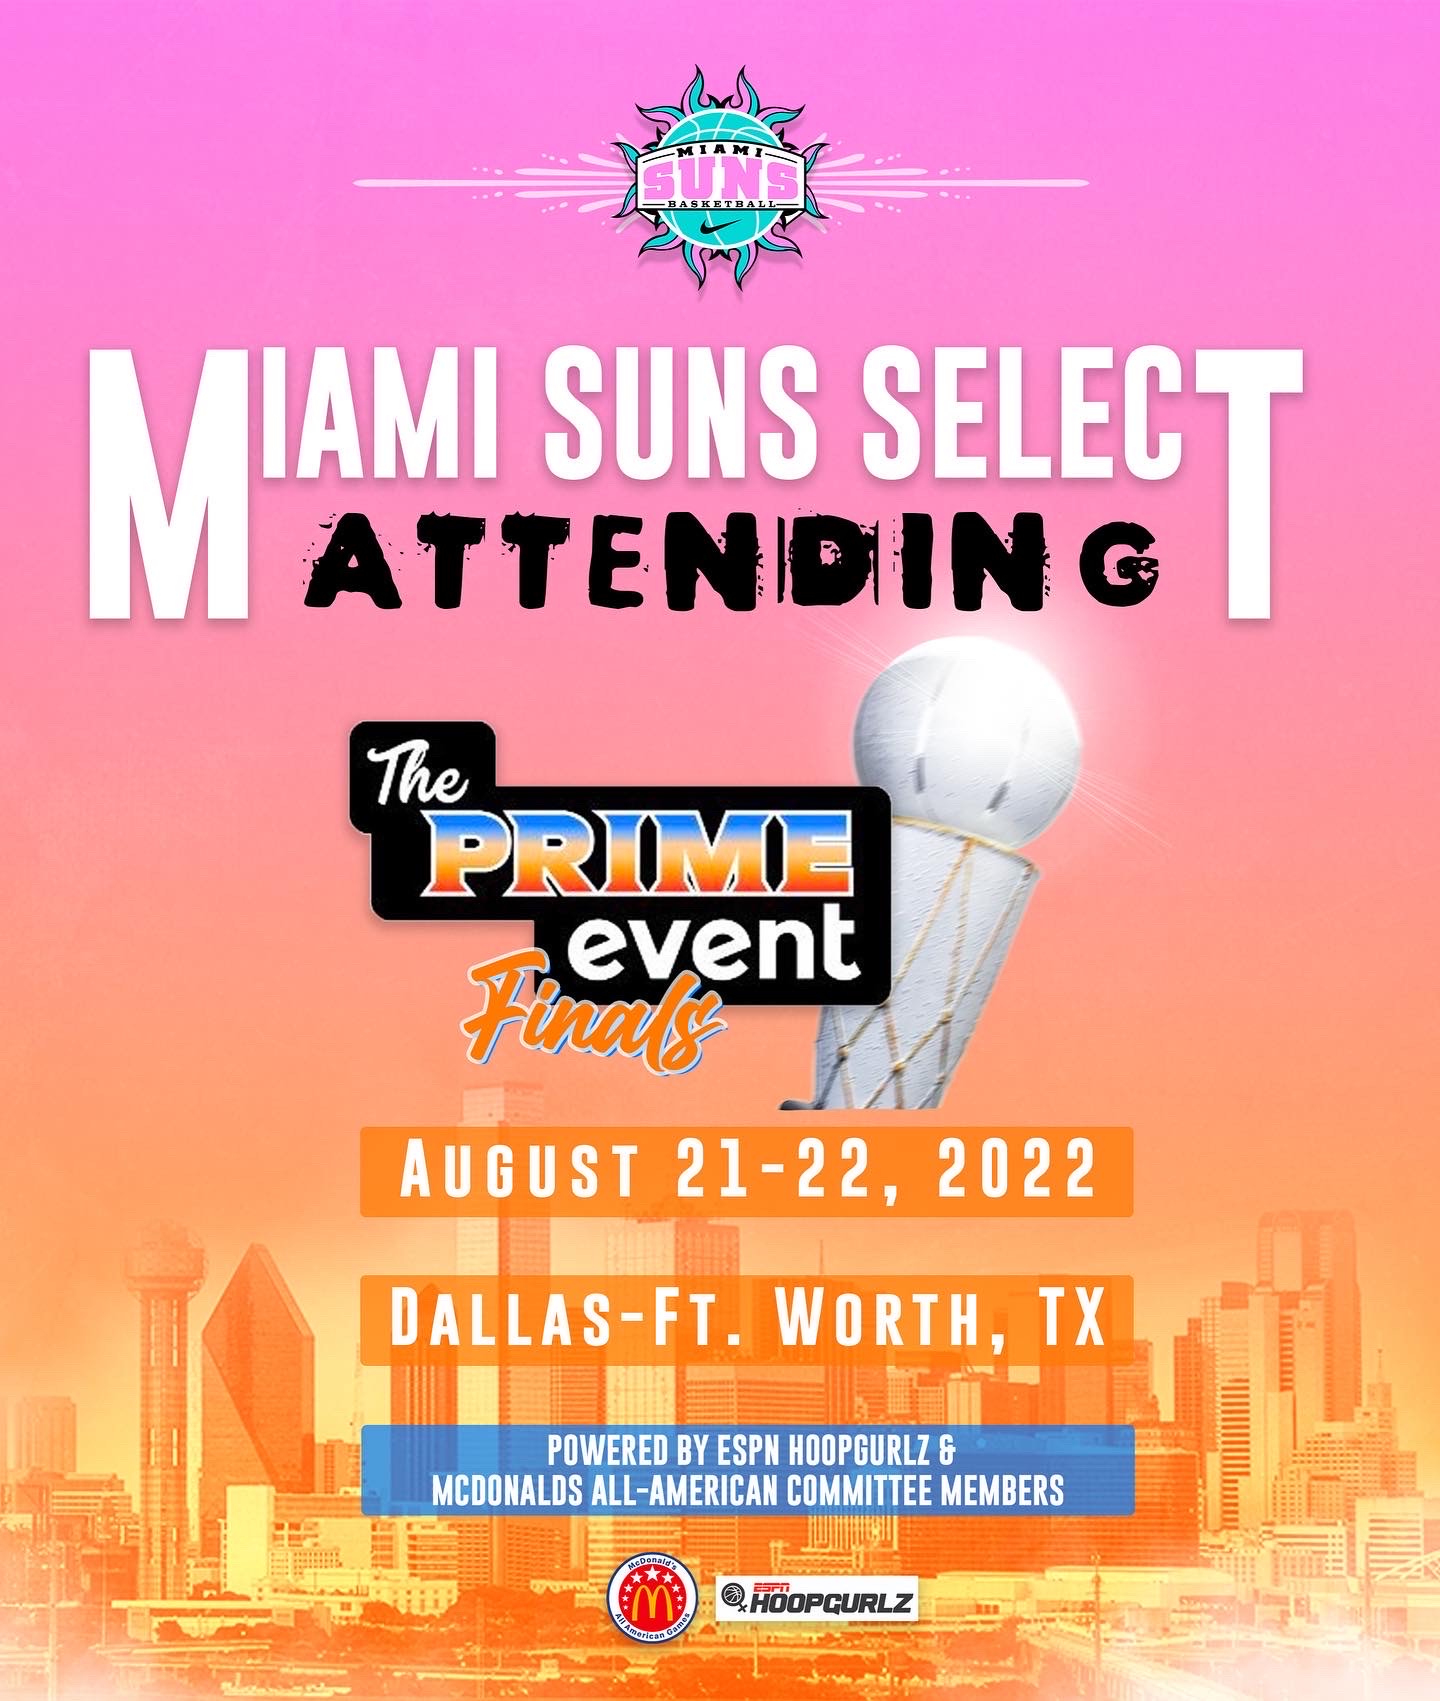 Miami Suns Select Attending the Prime Event Finals